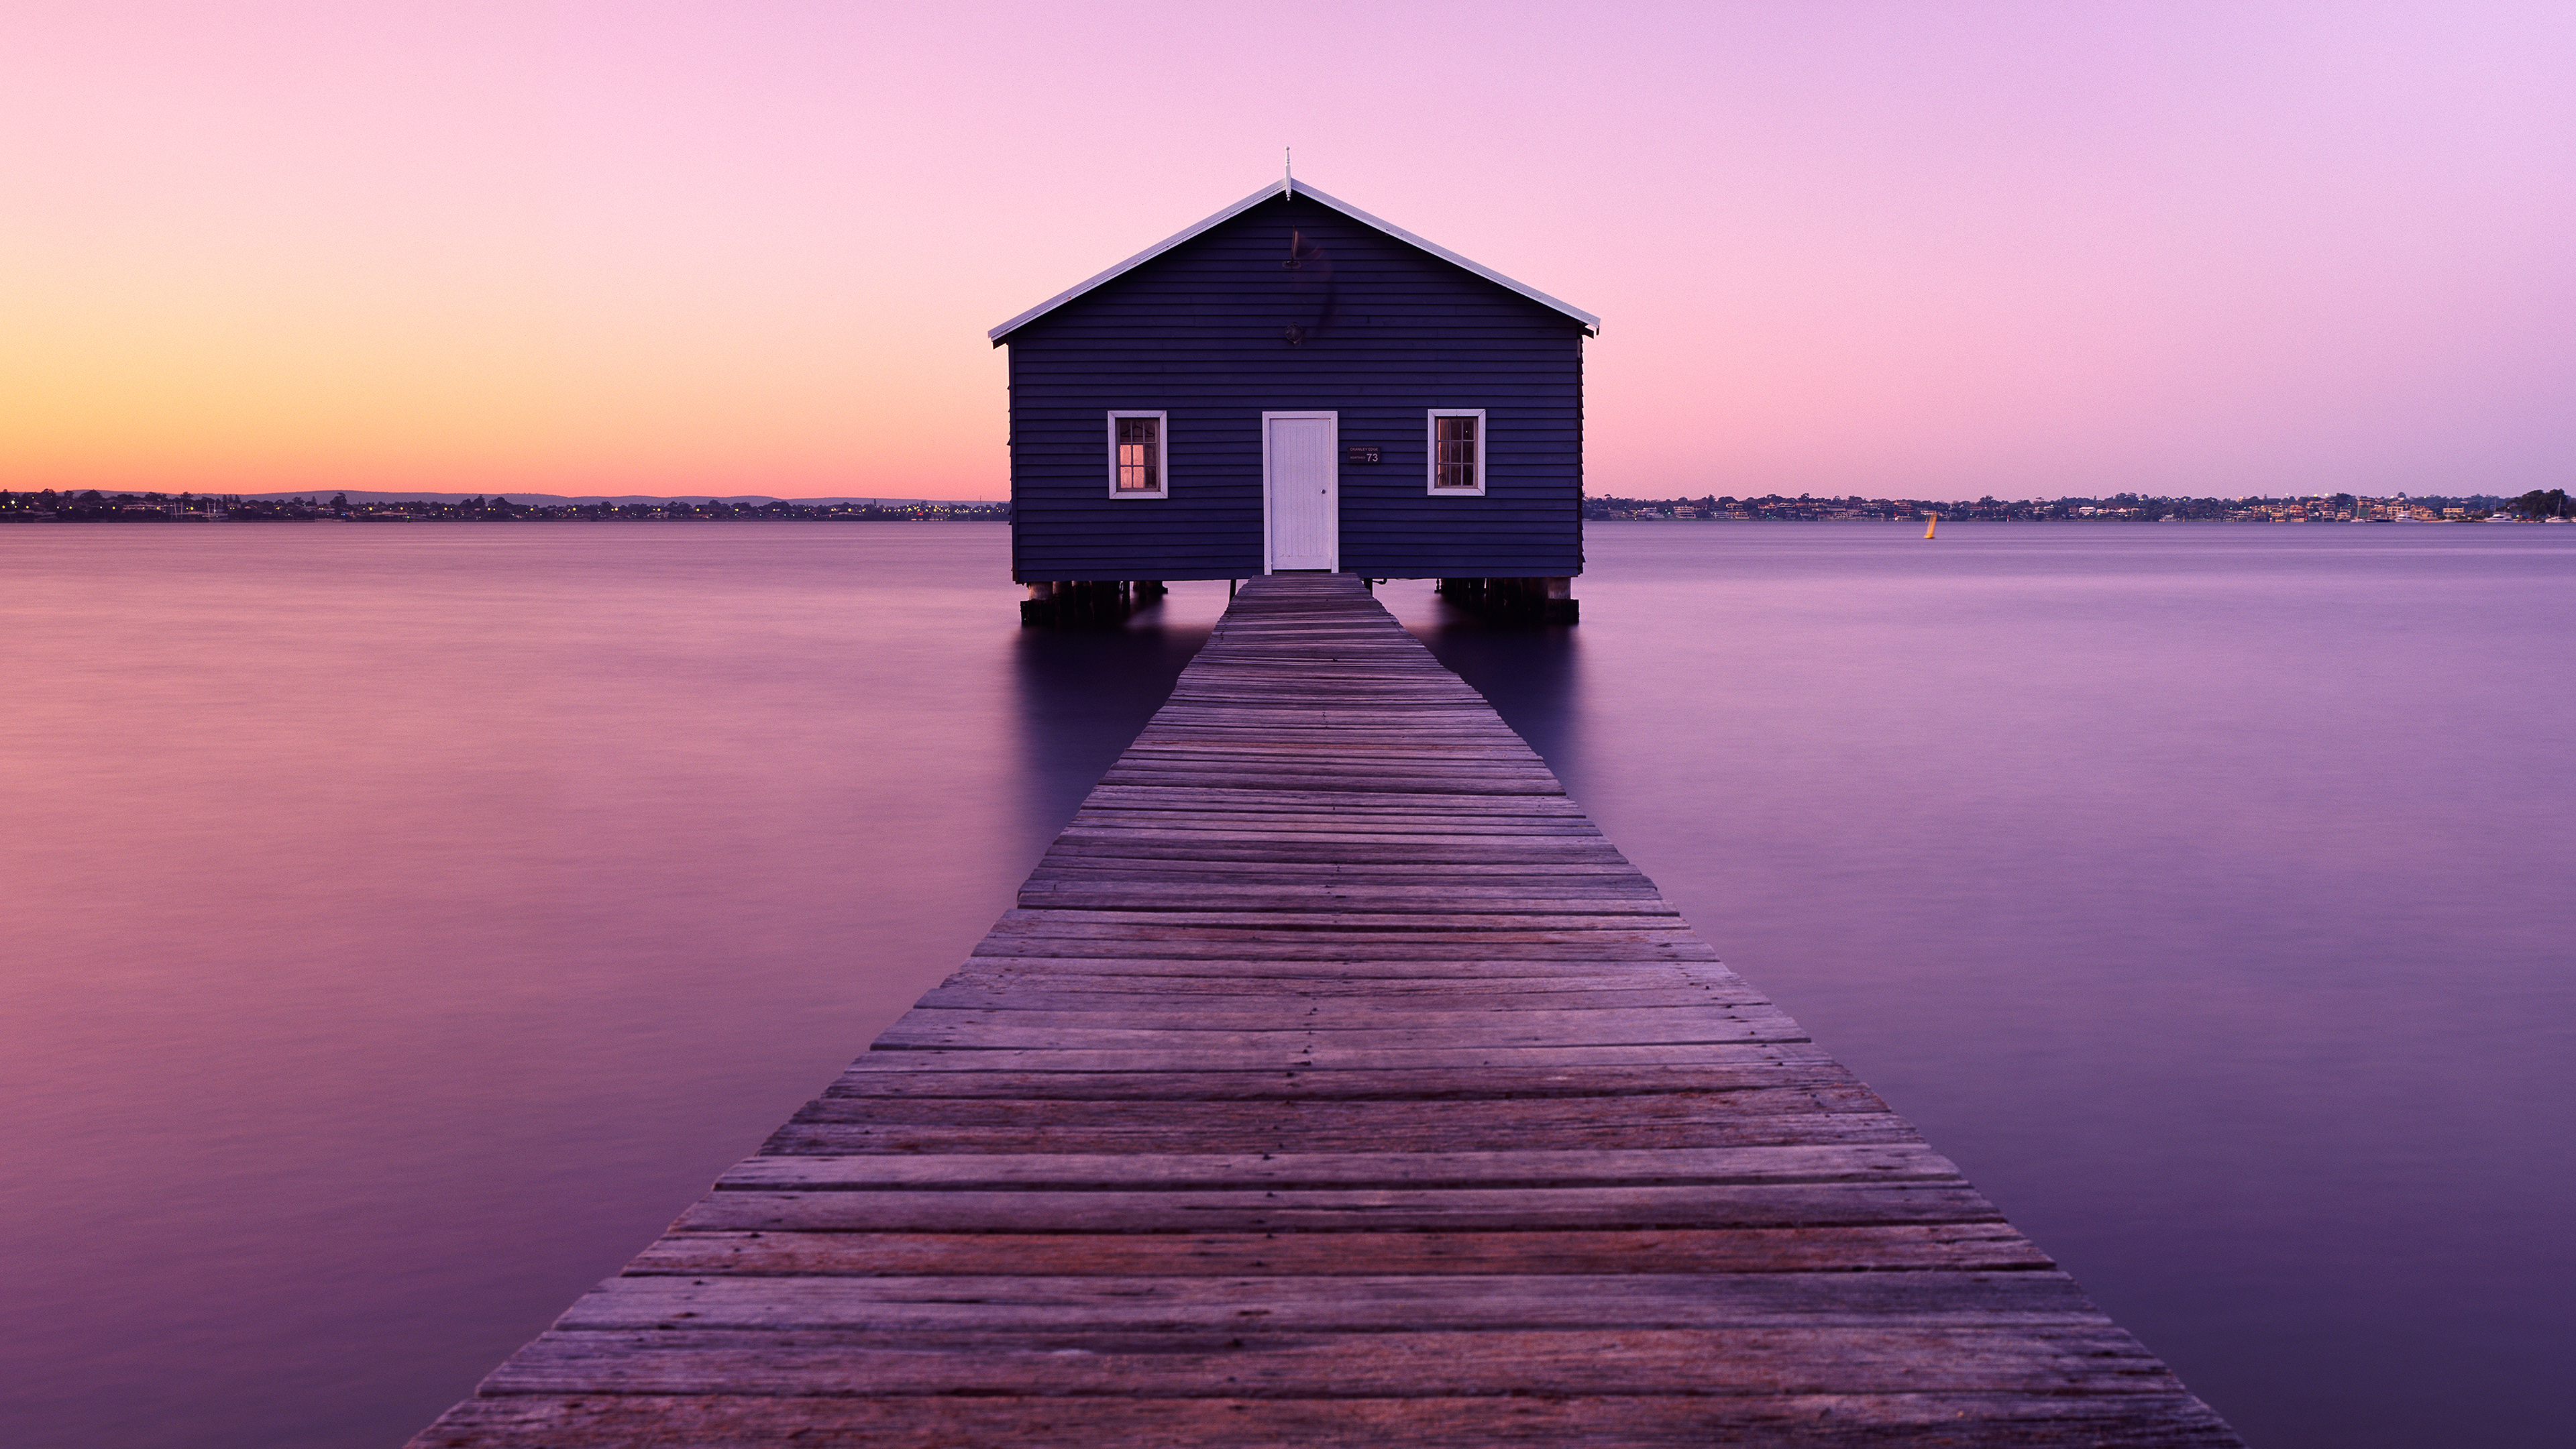 man made, boathouse, house, water